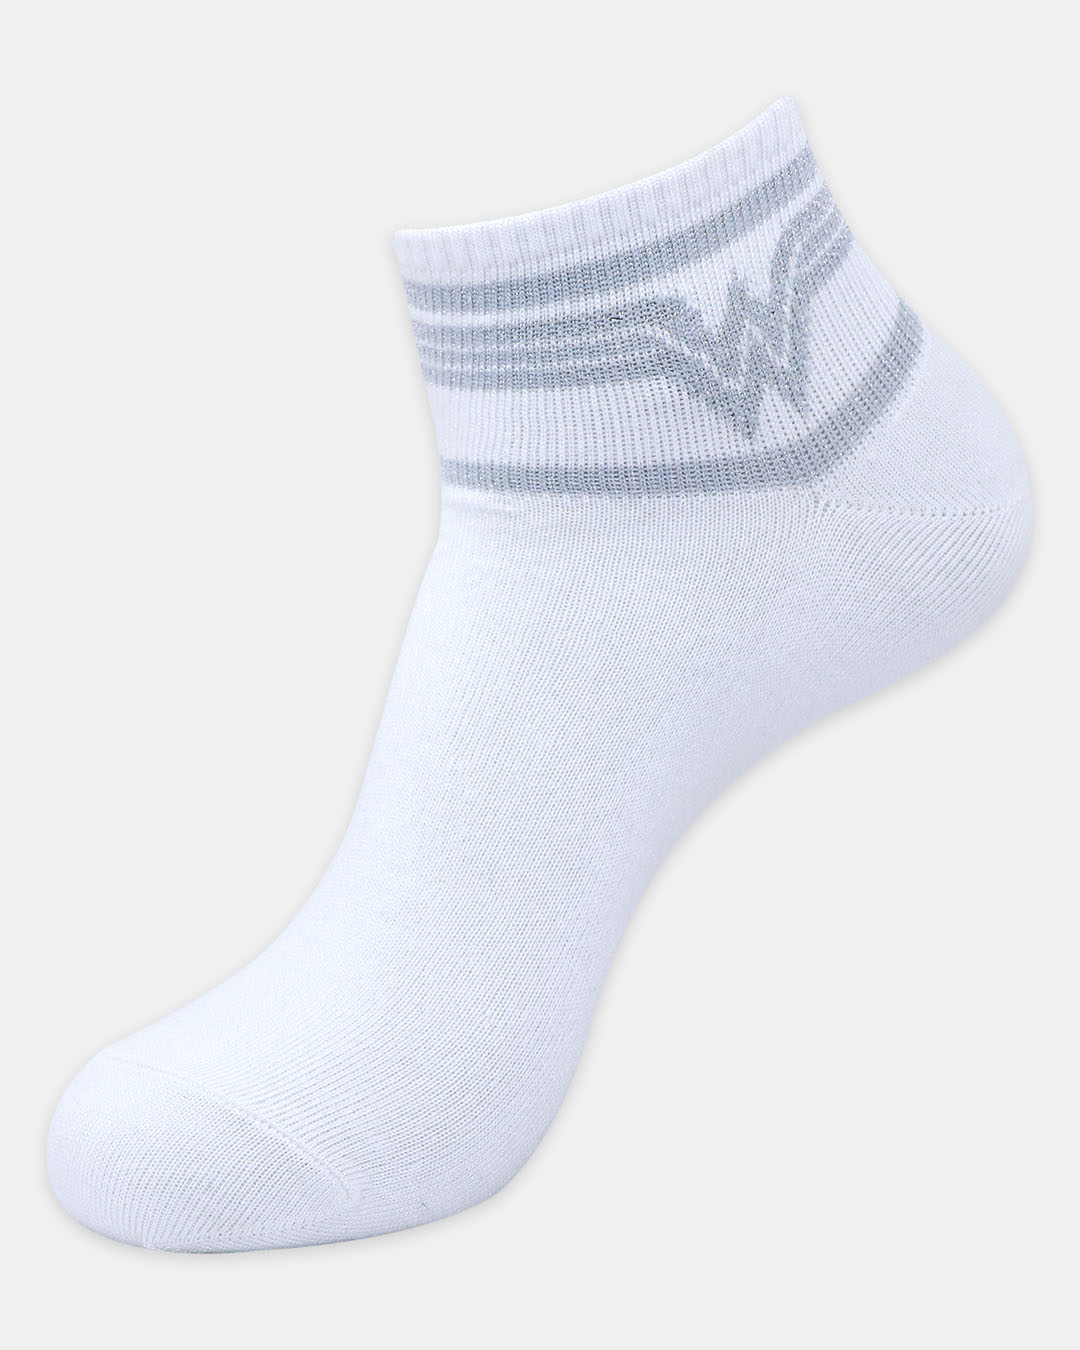 Shop Pack of 2 Justice League Wonder Woman White & Silver Ankle Socks-Back